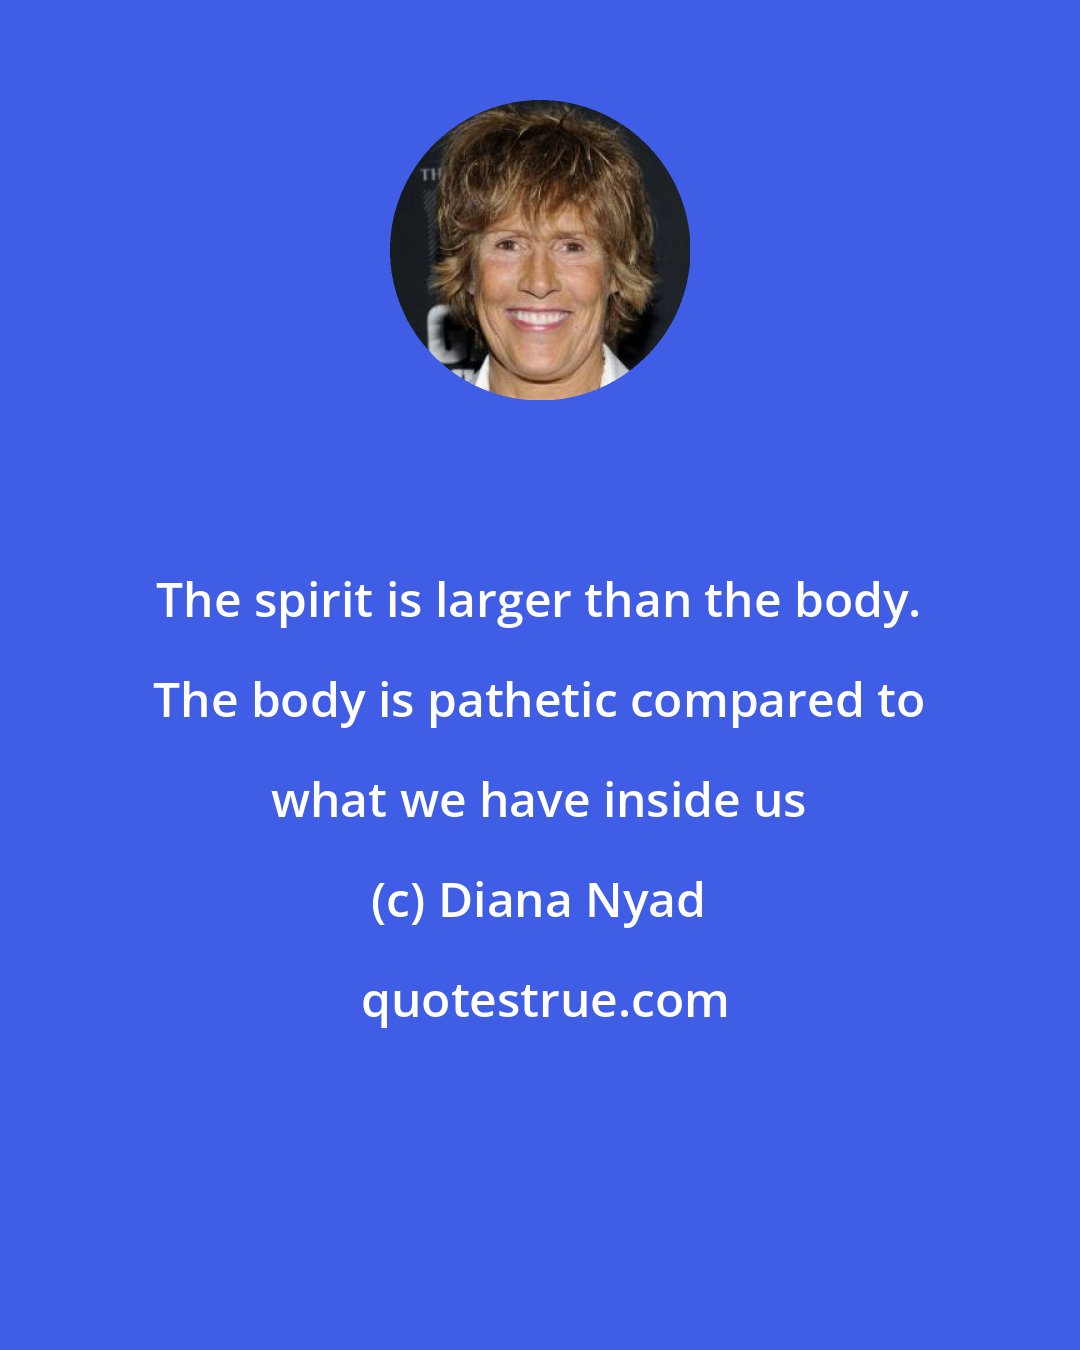 Diana Nyad: The spirit is larger than the body. The body is pathetic compared to what we have inside us